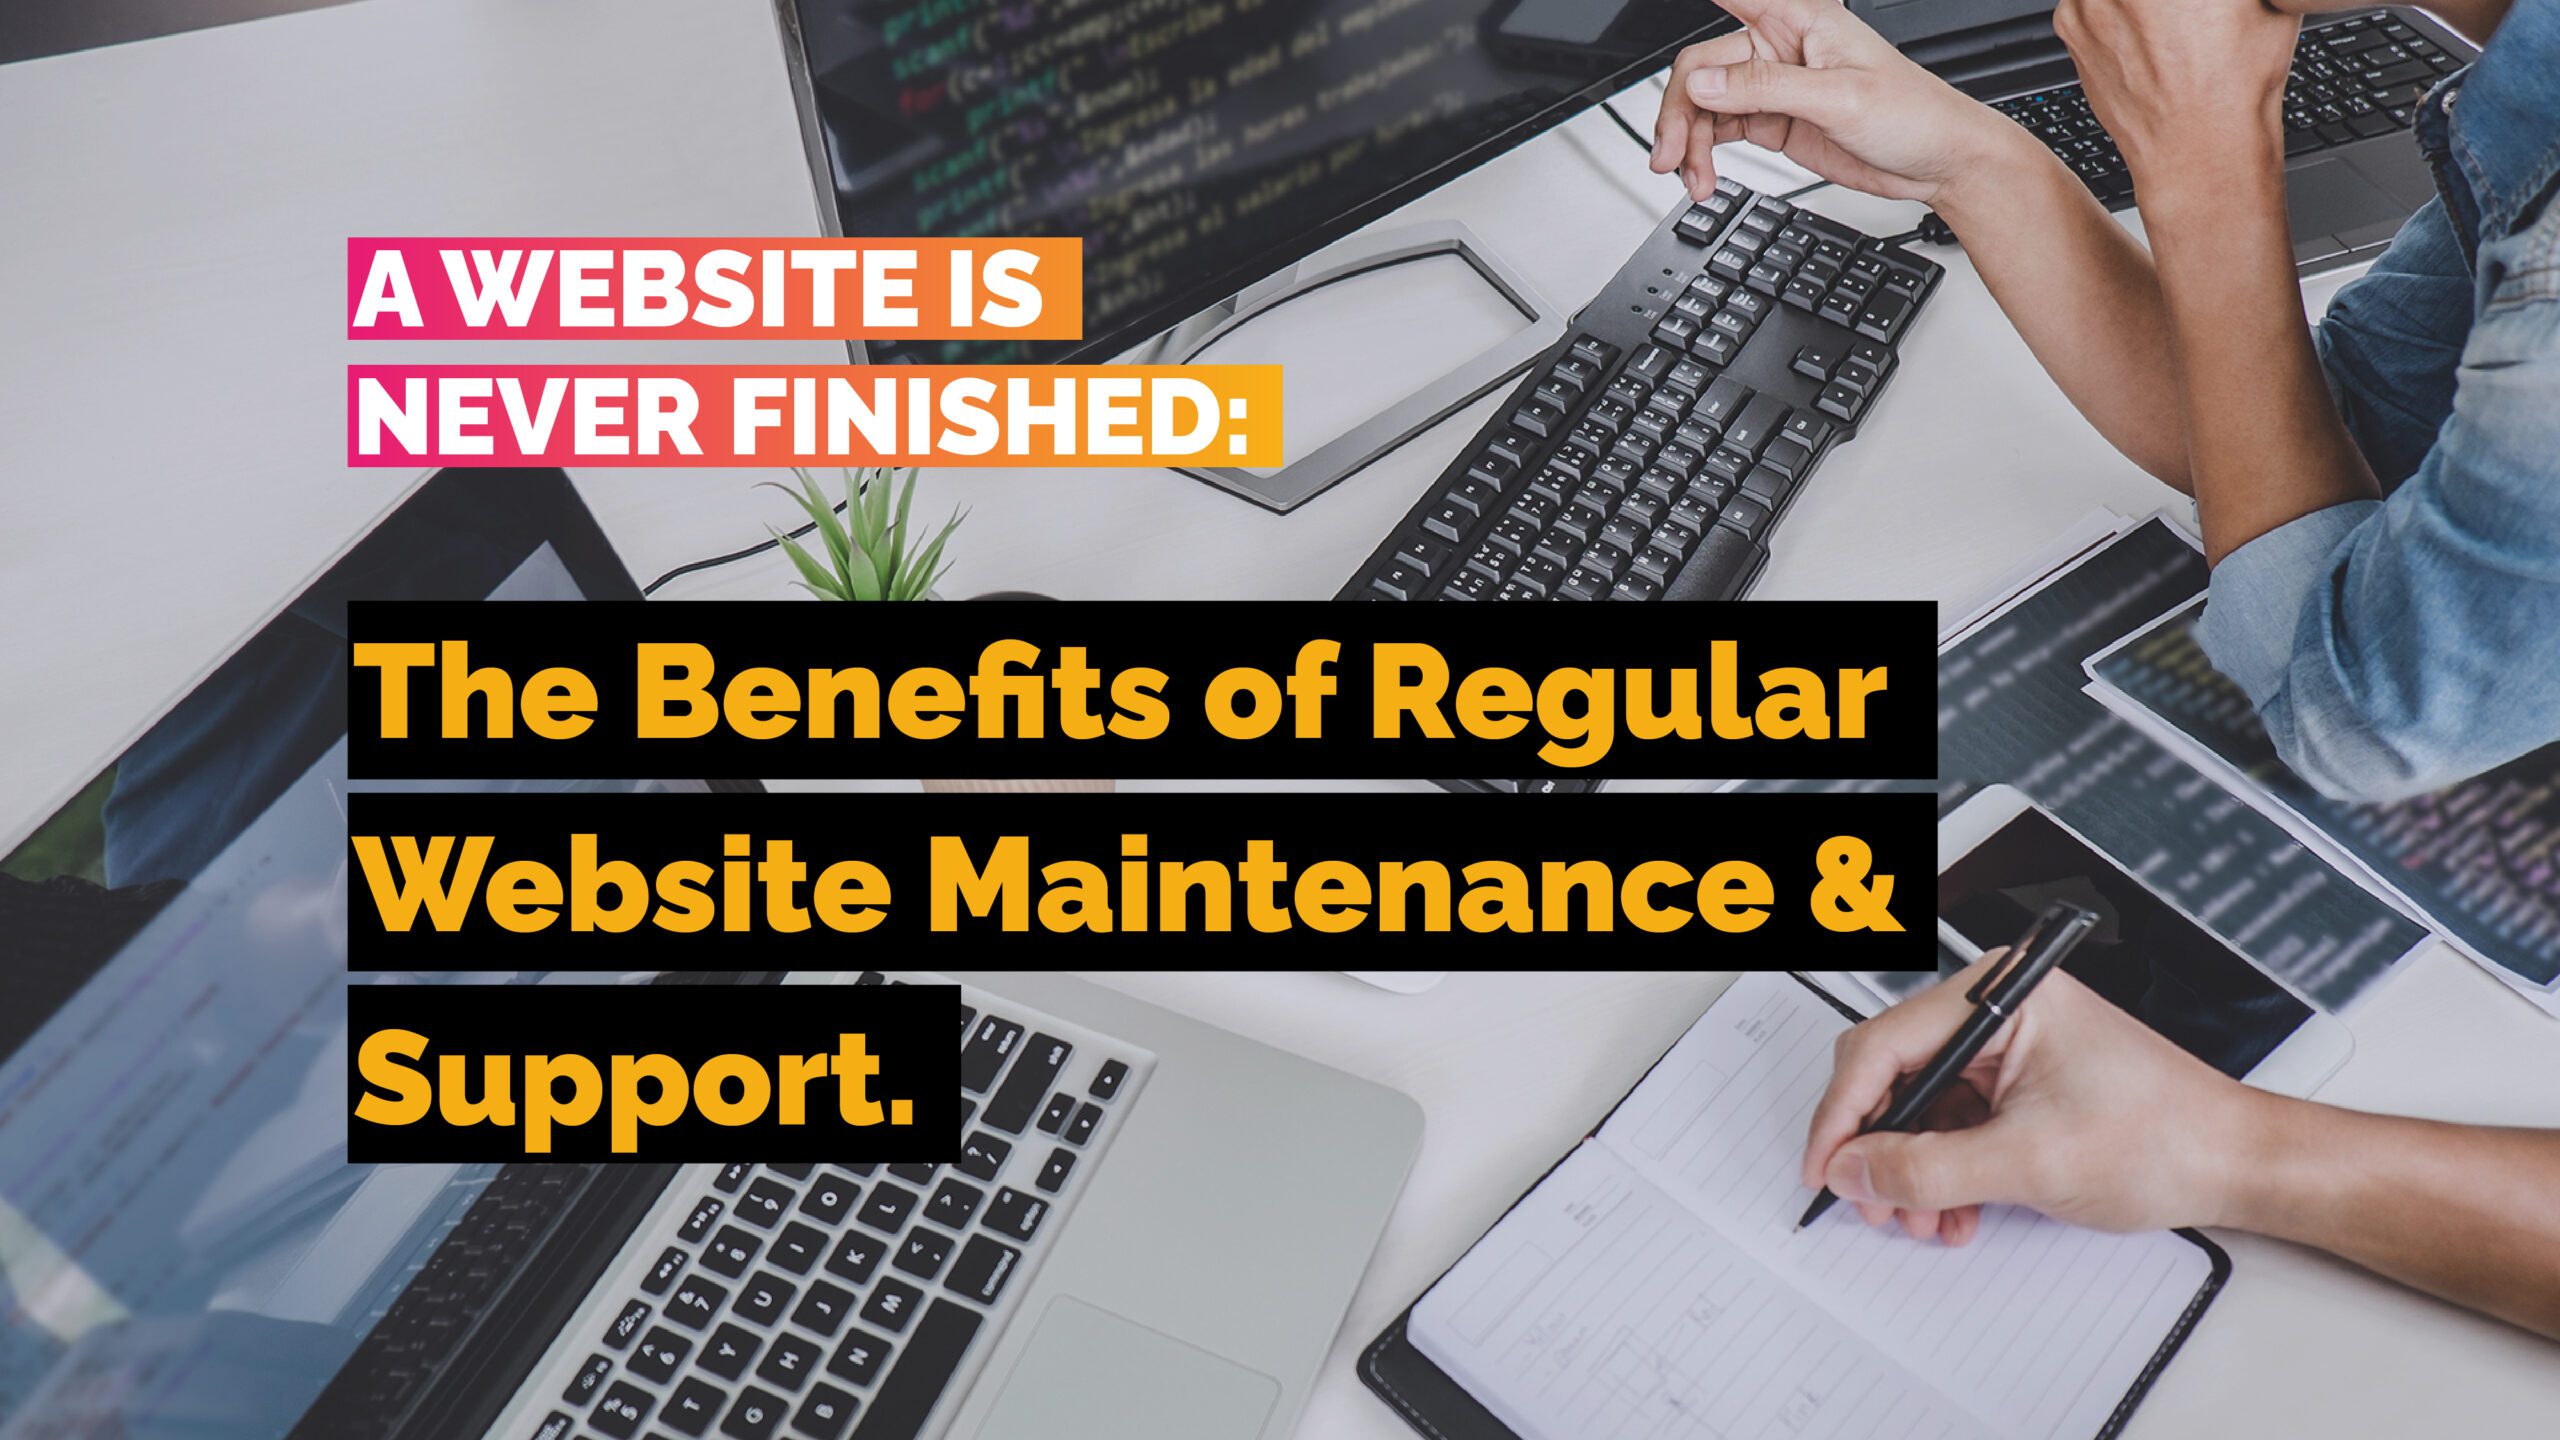 A Website is Never Finished; The Benefits of Regular Website Maintenance and Support